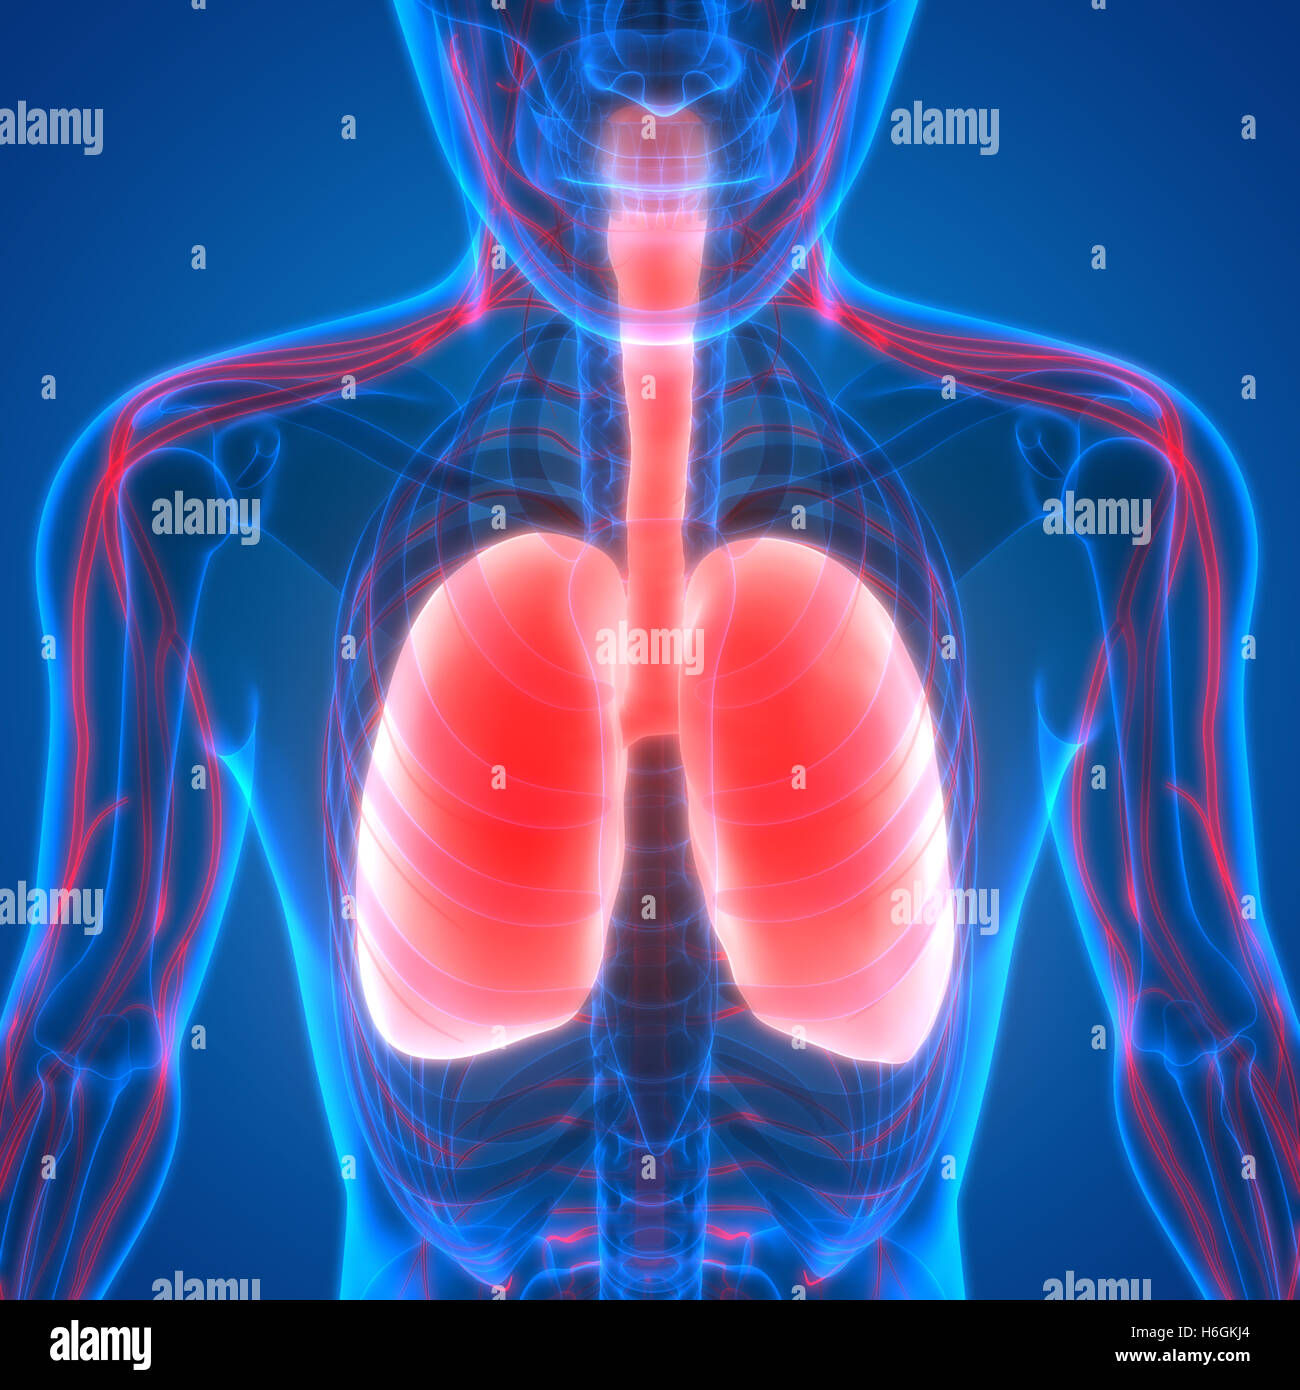 Human Respiratory System Lungs with Nervous System Anatomy Stock Photo